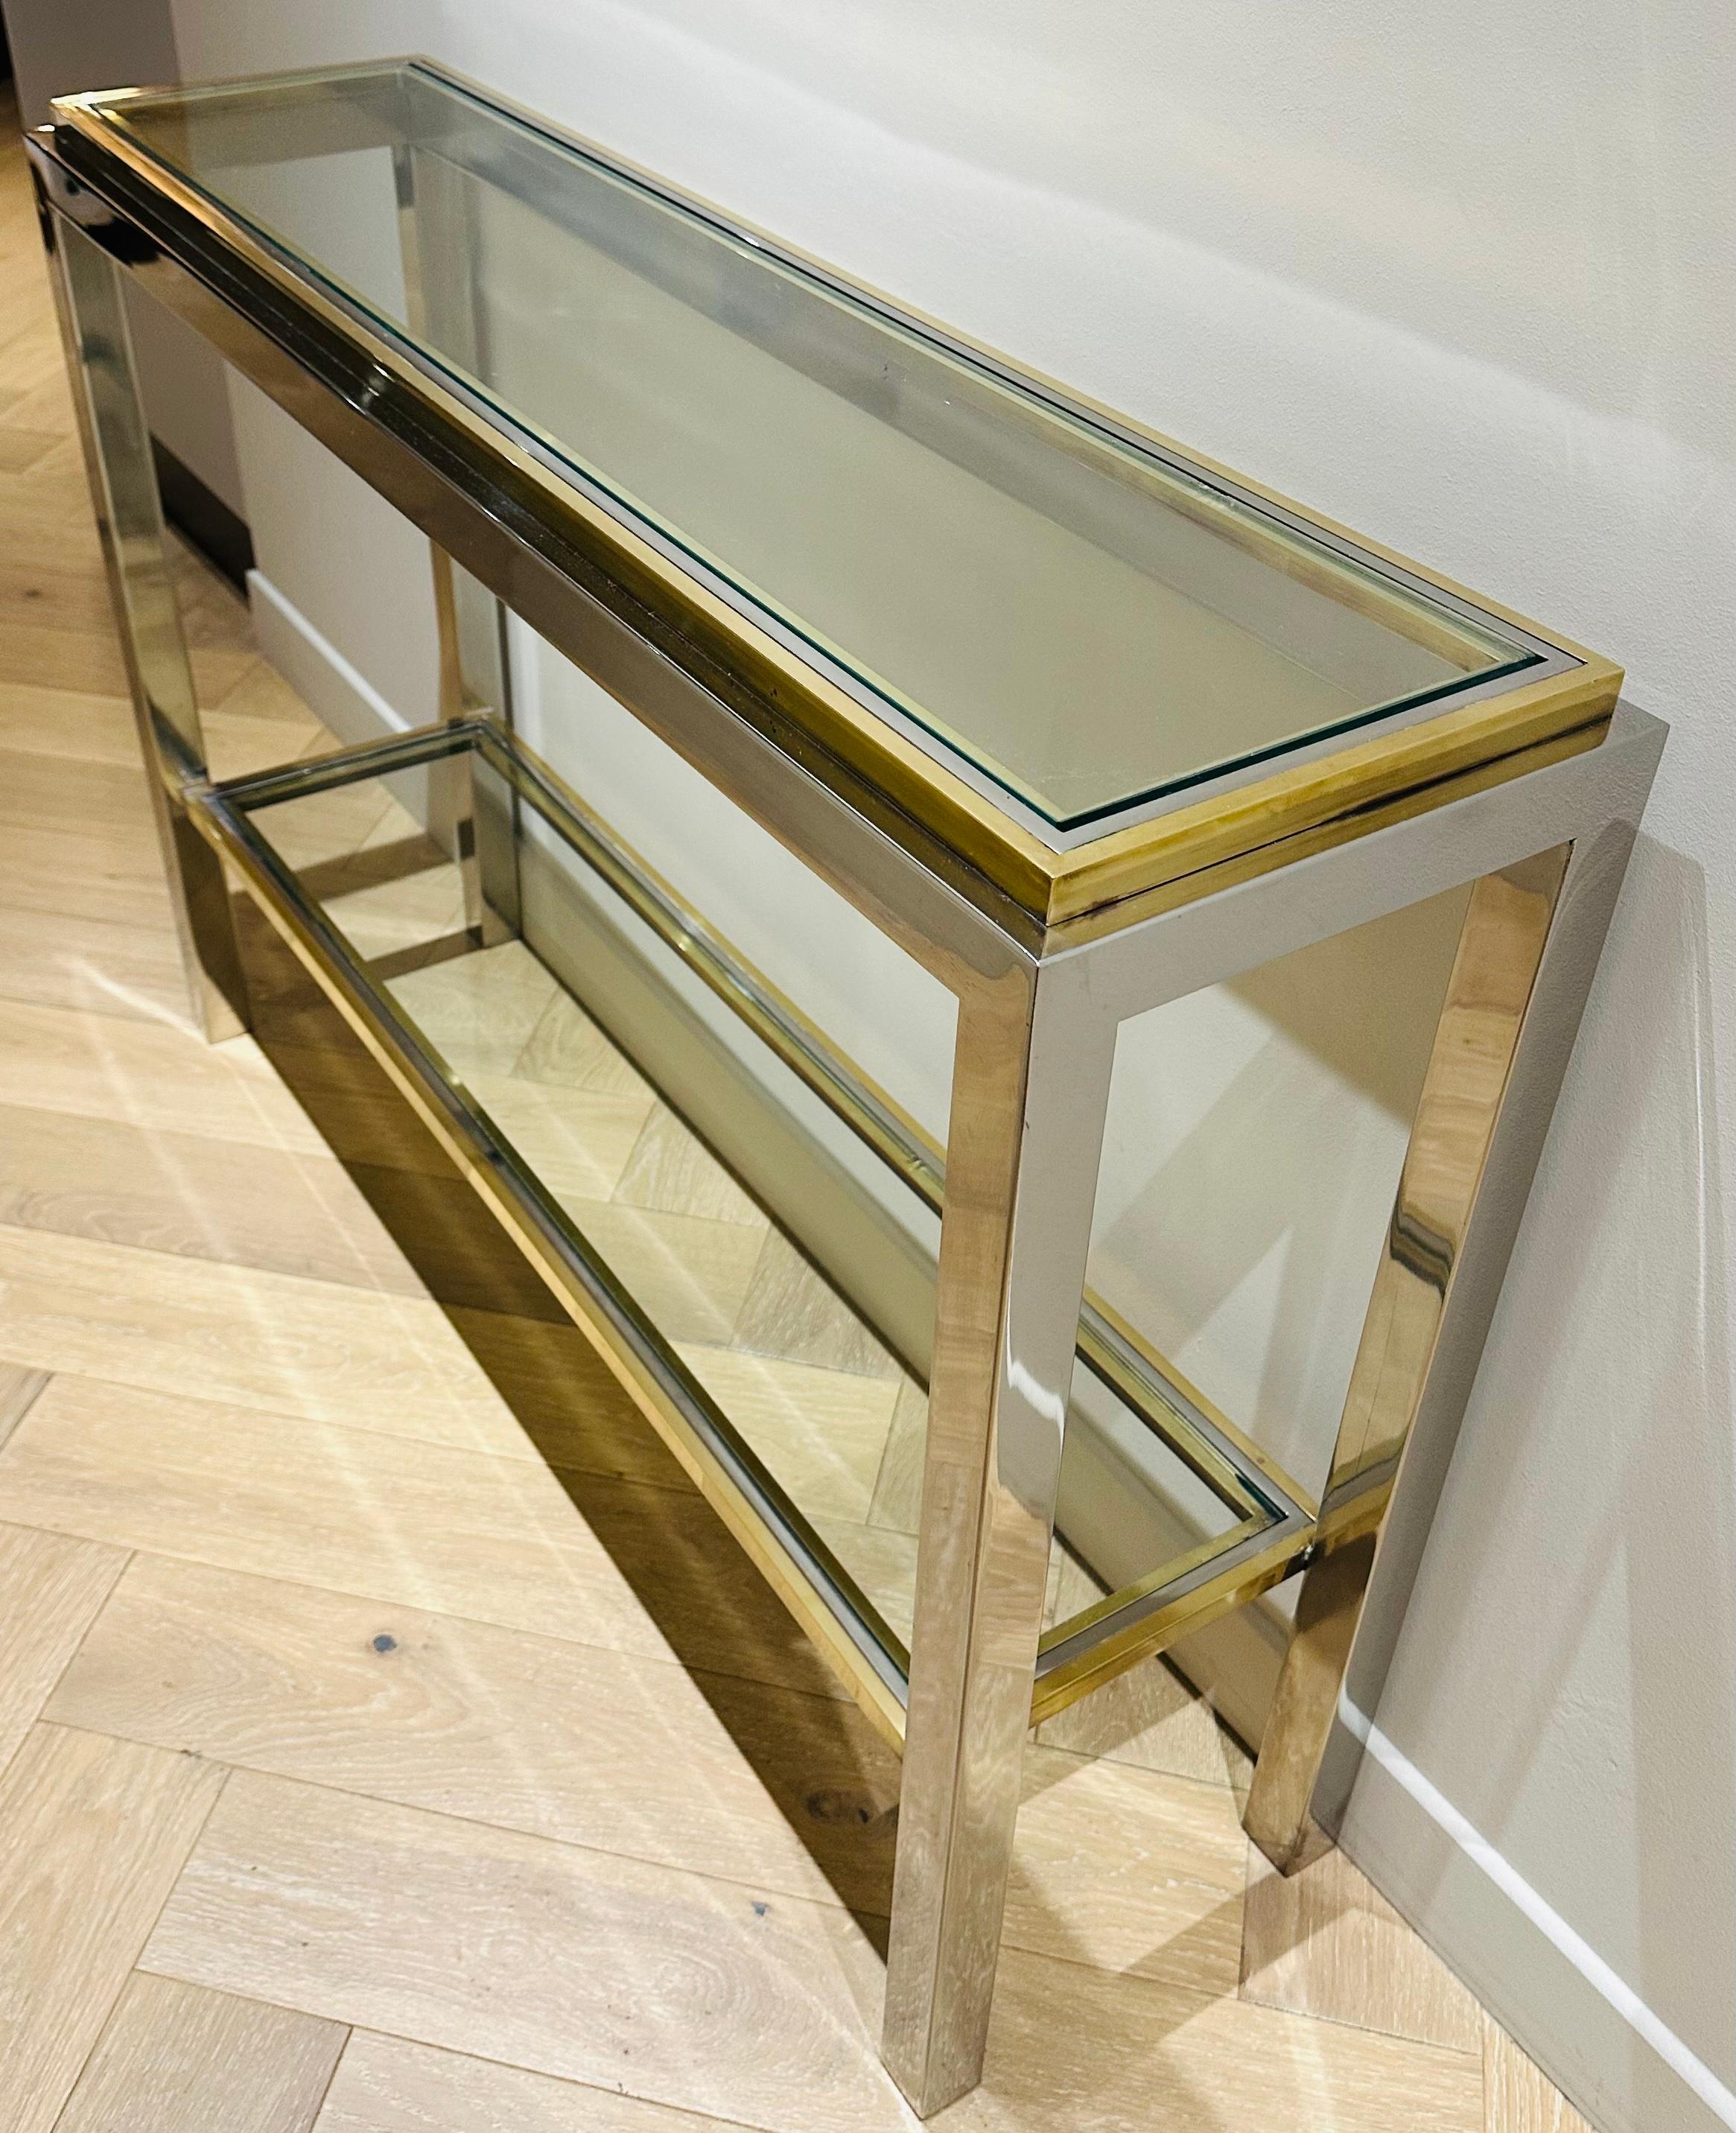 1970s French Maison Jean Charles brass, chrome and glass slim console table.  Two-tiered with clear glass bevelled shelves which float within the polished chrome and brass frame.  Signed 